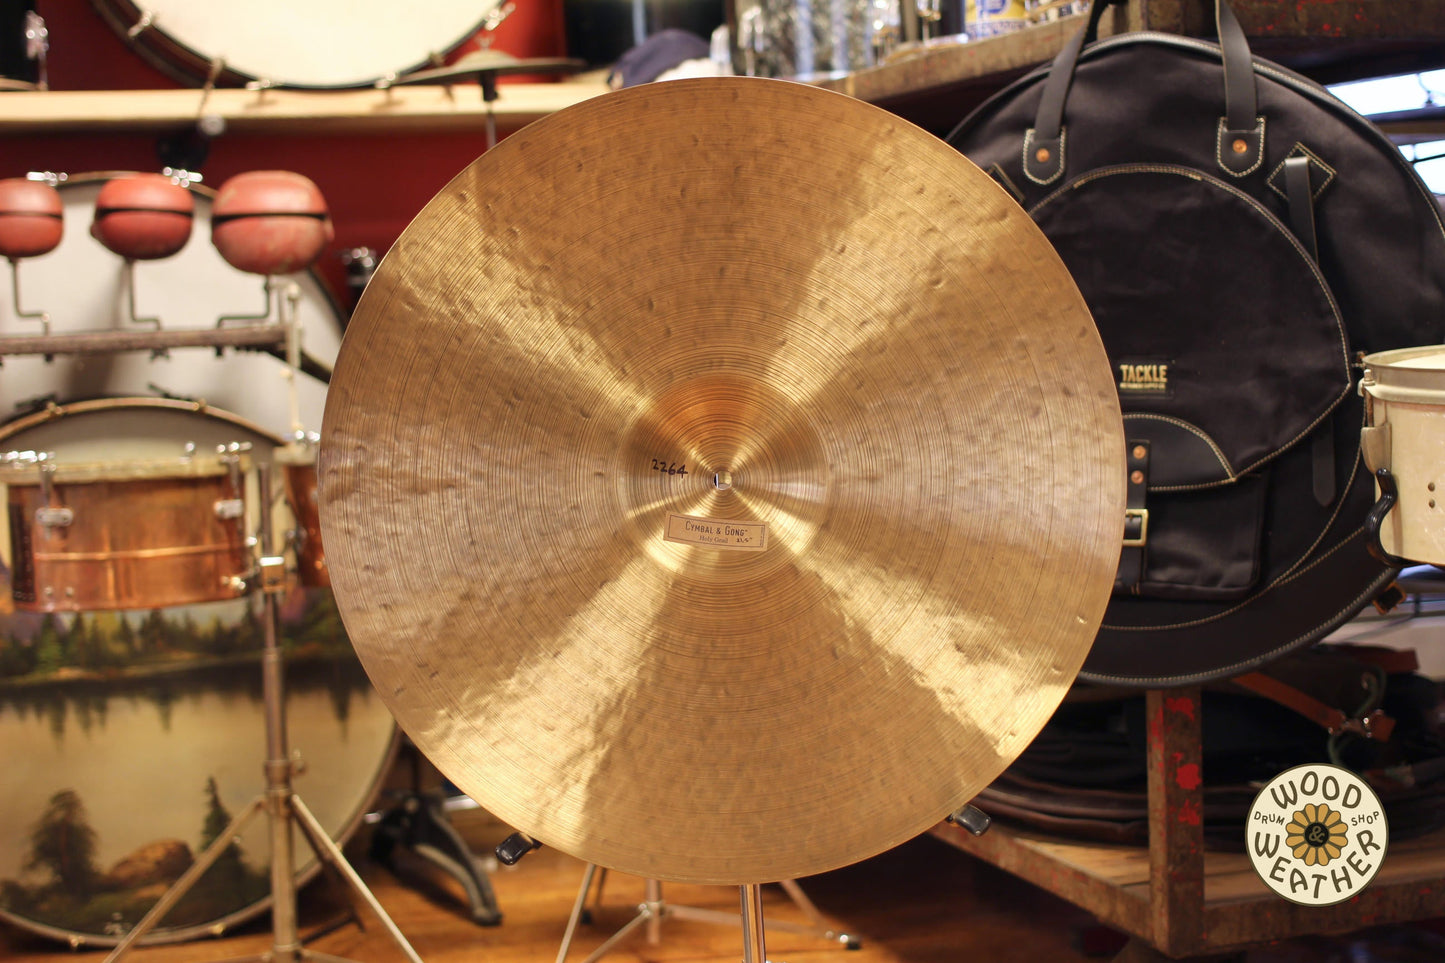 Cymbal & Gong 22" Holy Grail Ride Cymbal 2264g